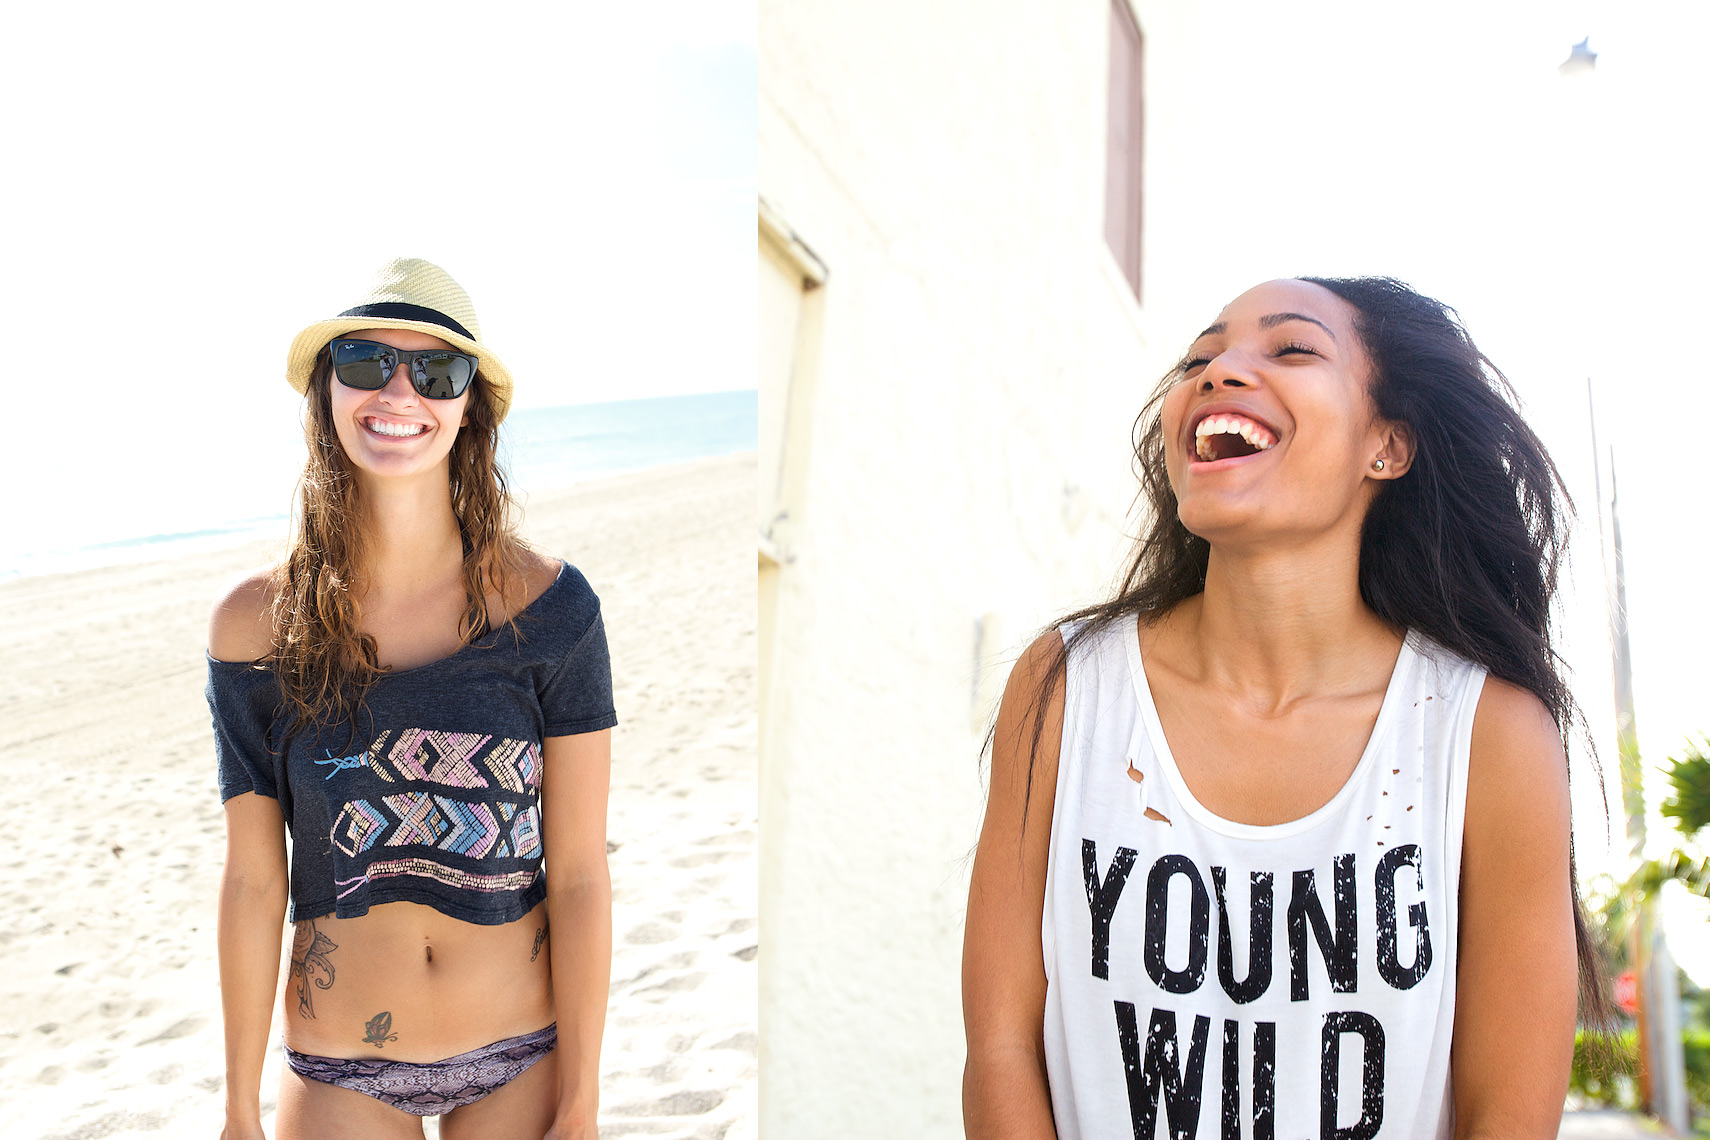 two hipster girls, Florida, young and wild_Robert-Holland.jpg